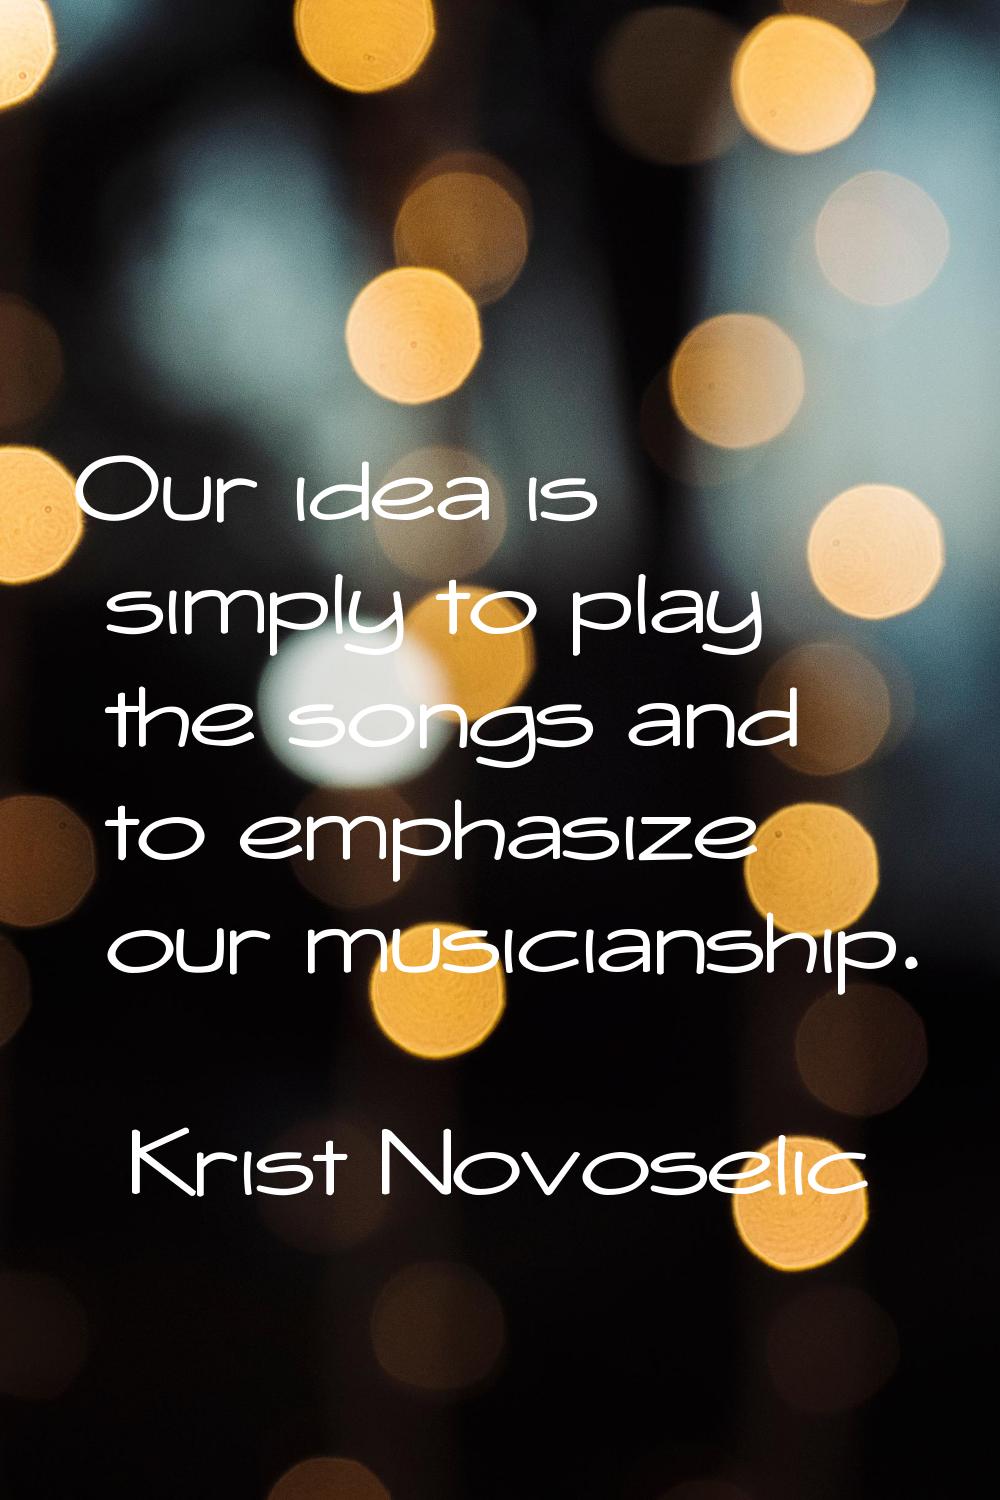 Our idea is simply to play the songs and to emphasize our musicianship.